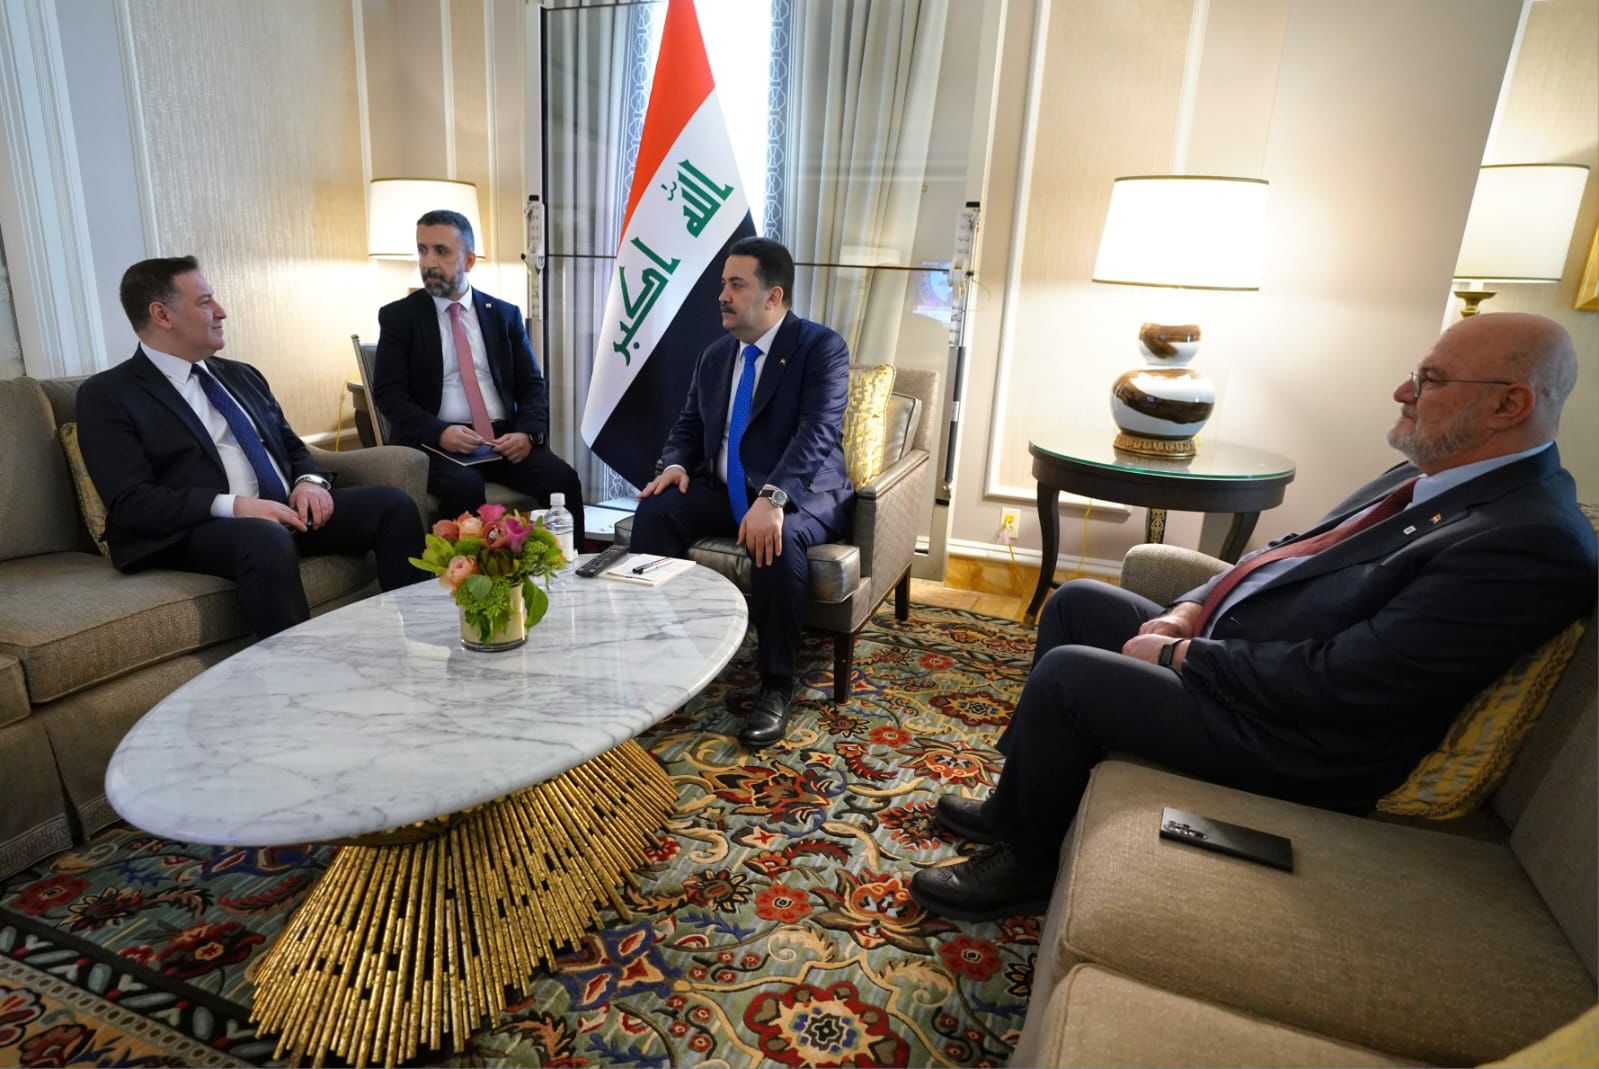 Iraqi PM secures military development deal with General Dynamics during Washington visit